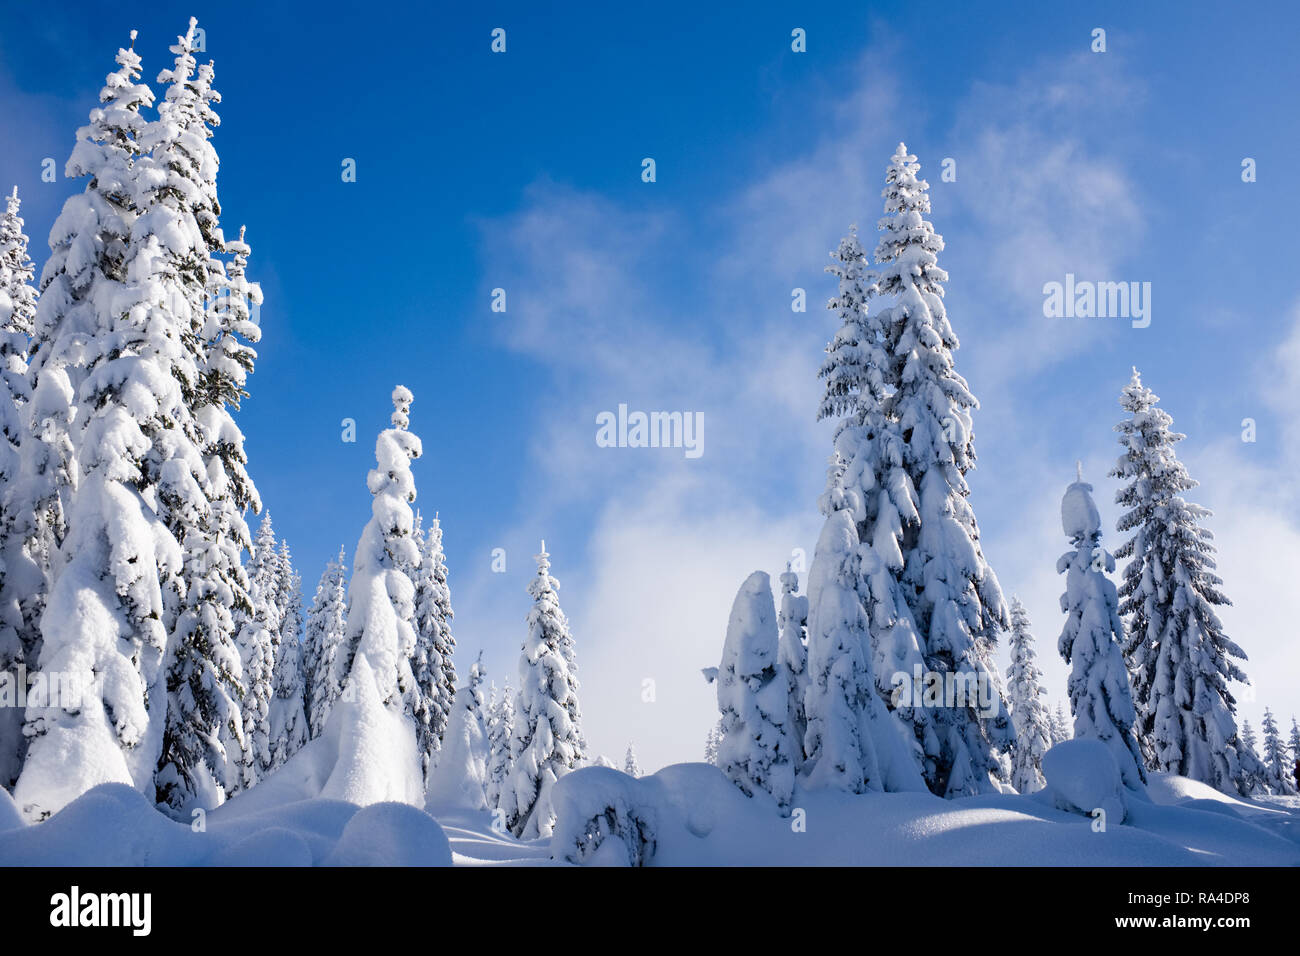 Snow blanketed subalpine forest, central Cascade Mountains, Washington State, USA Stock Photo